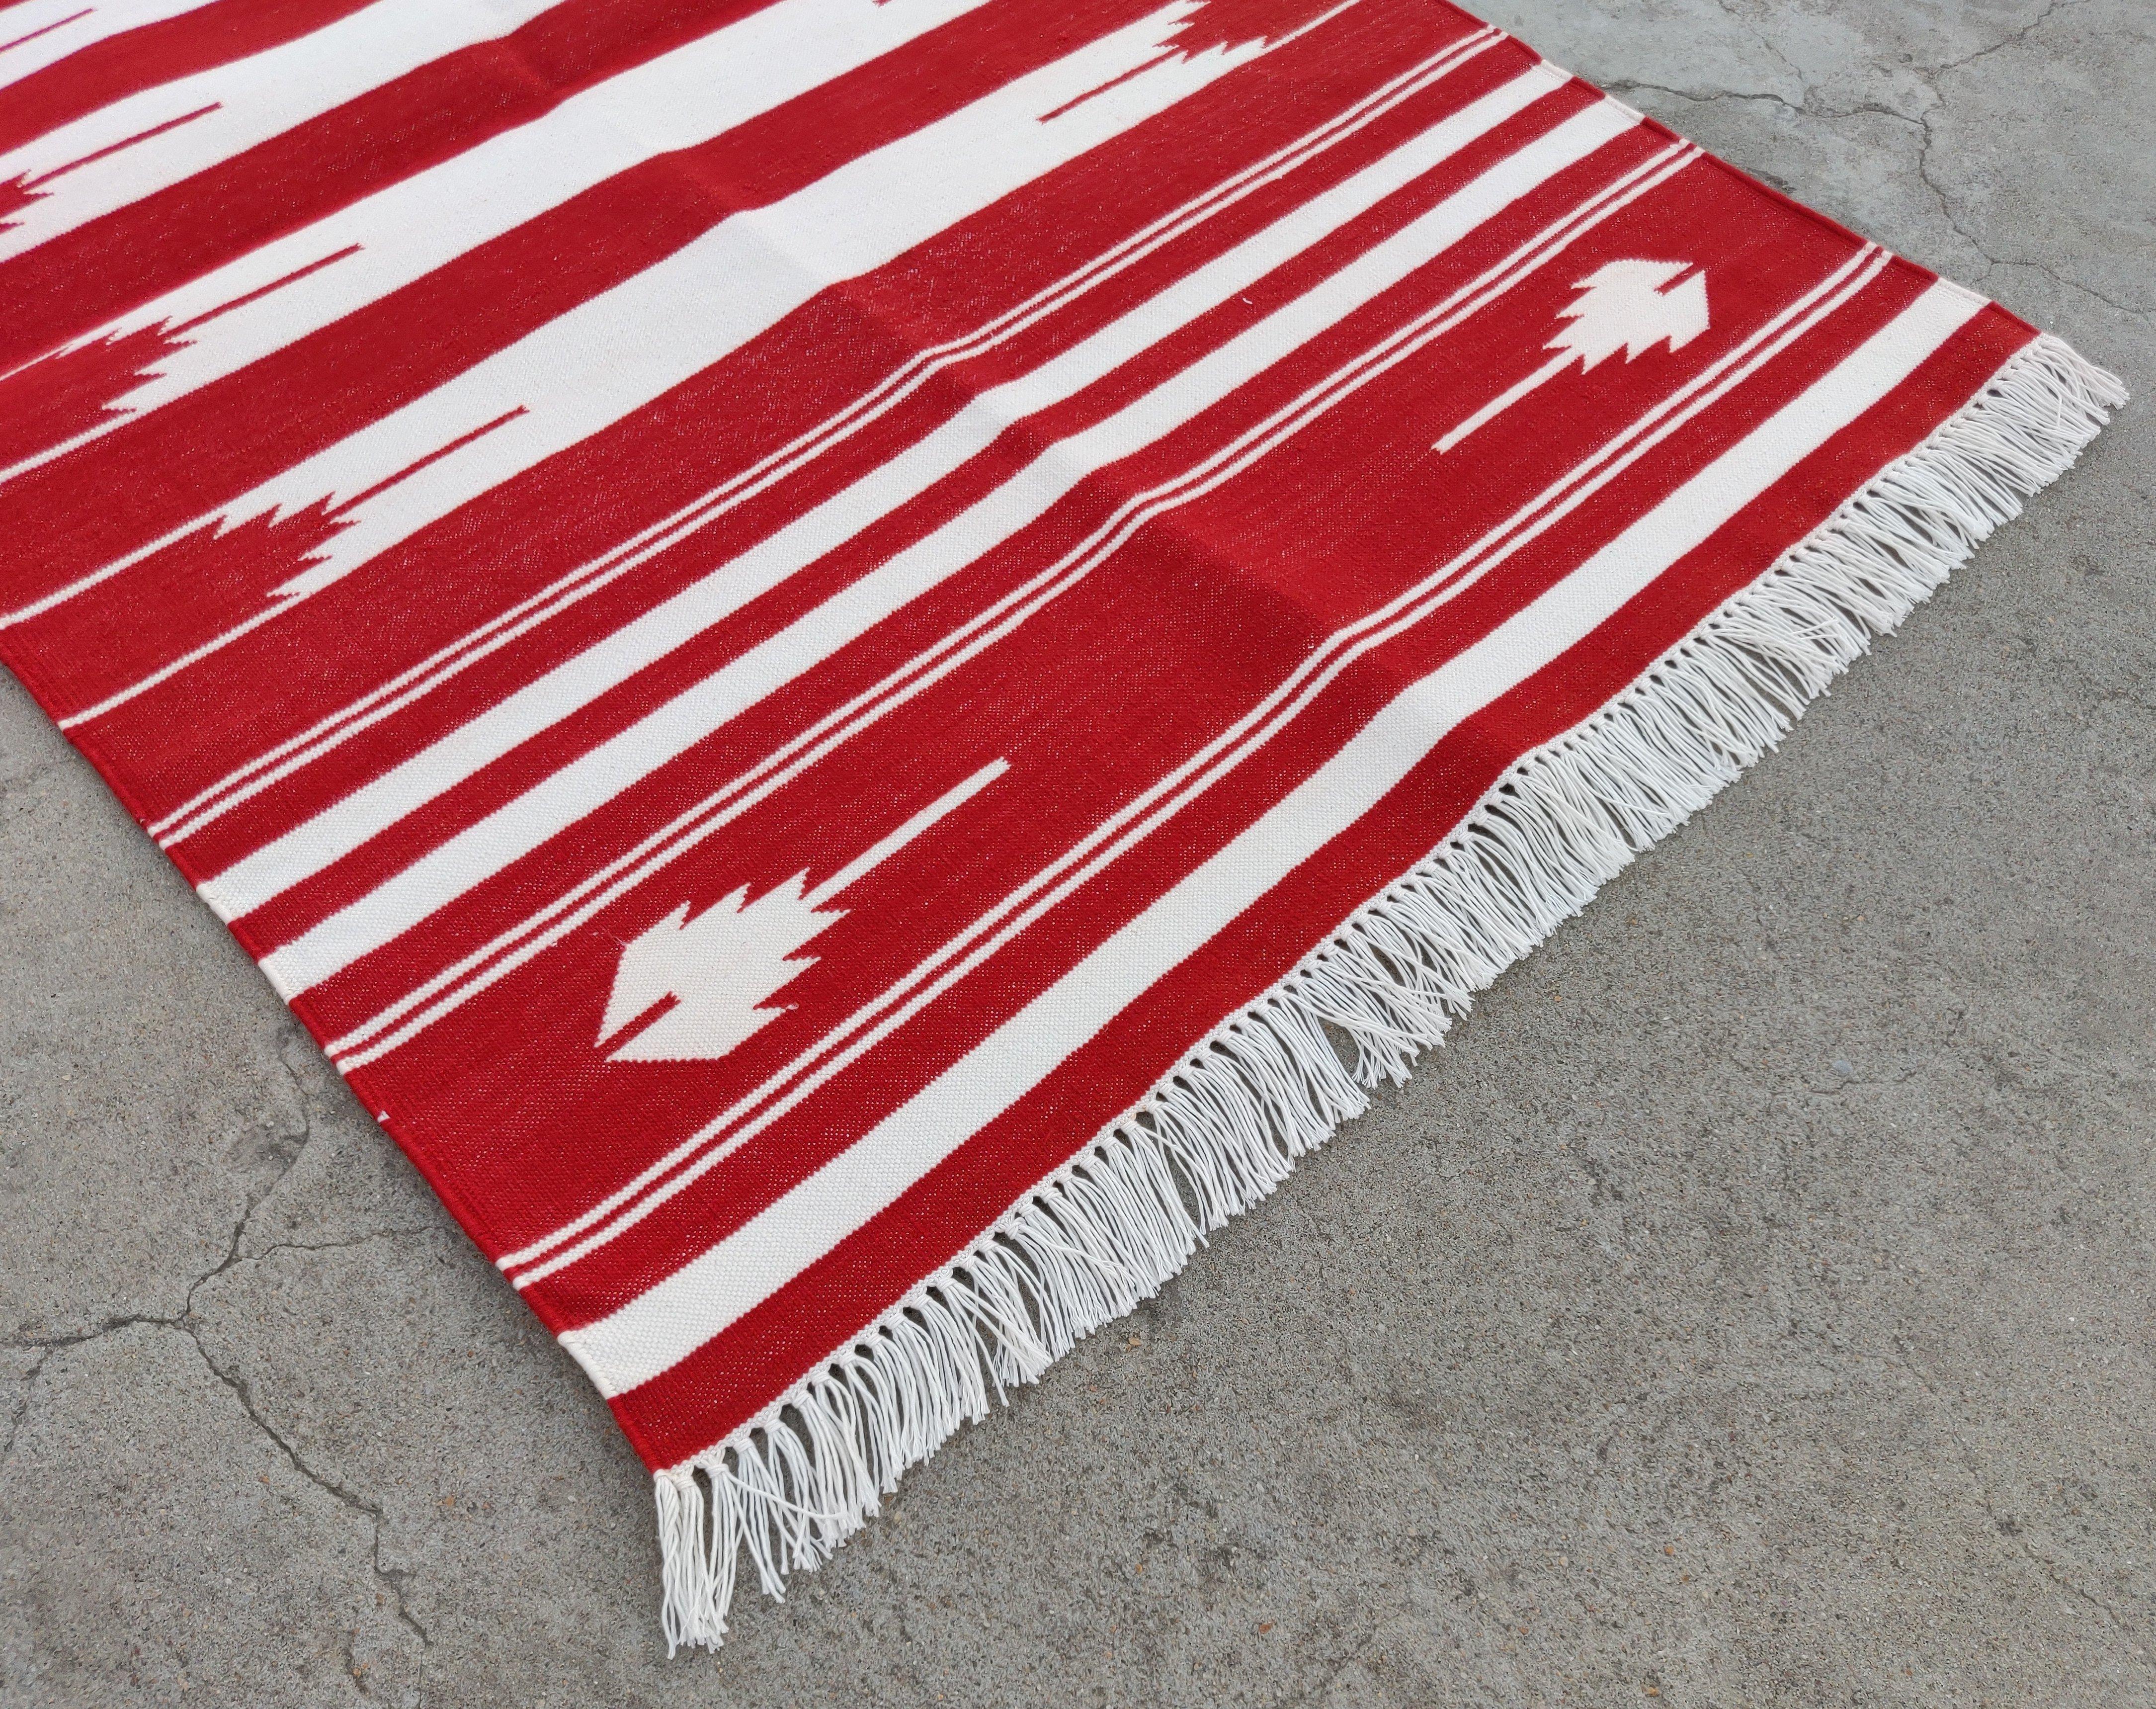 Mid-Century Modern Handmade Cotton Area Flat Weave Rug, 2.5'x4' Red And White Striped Indian Rug For Sale